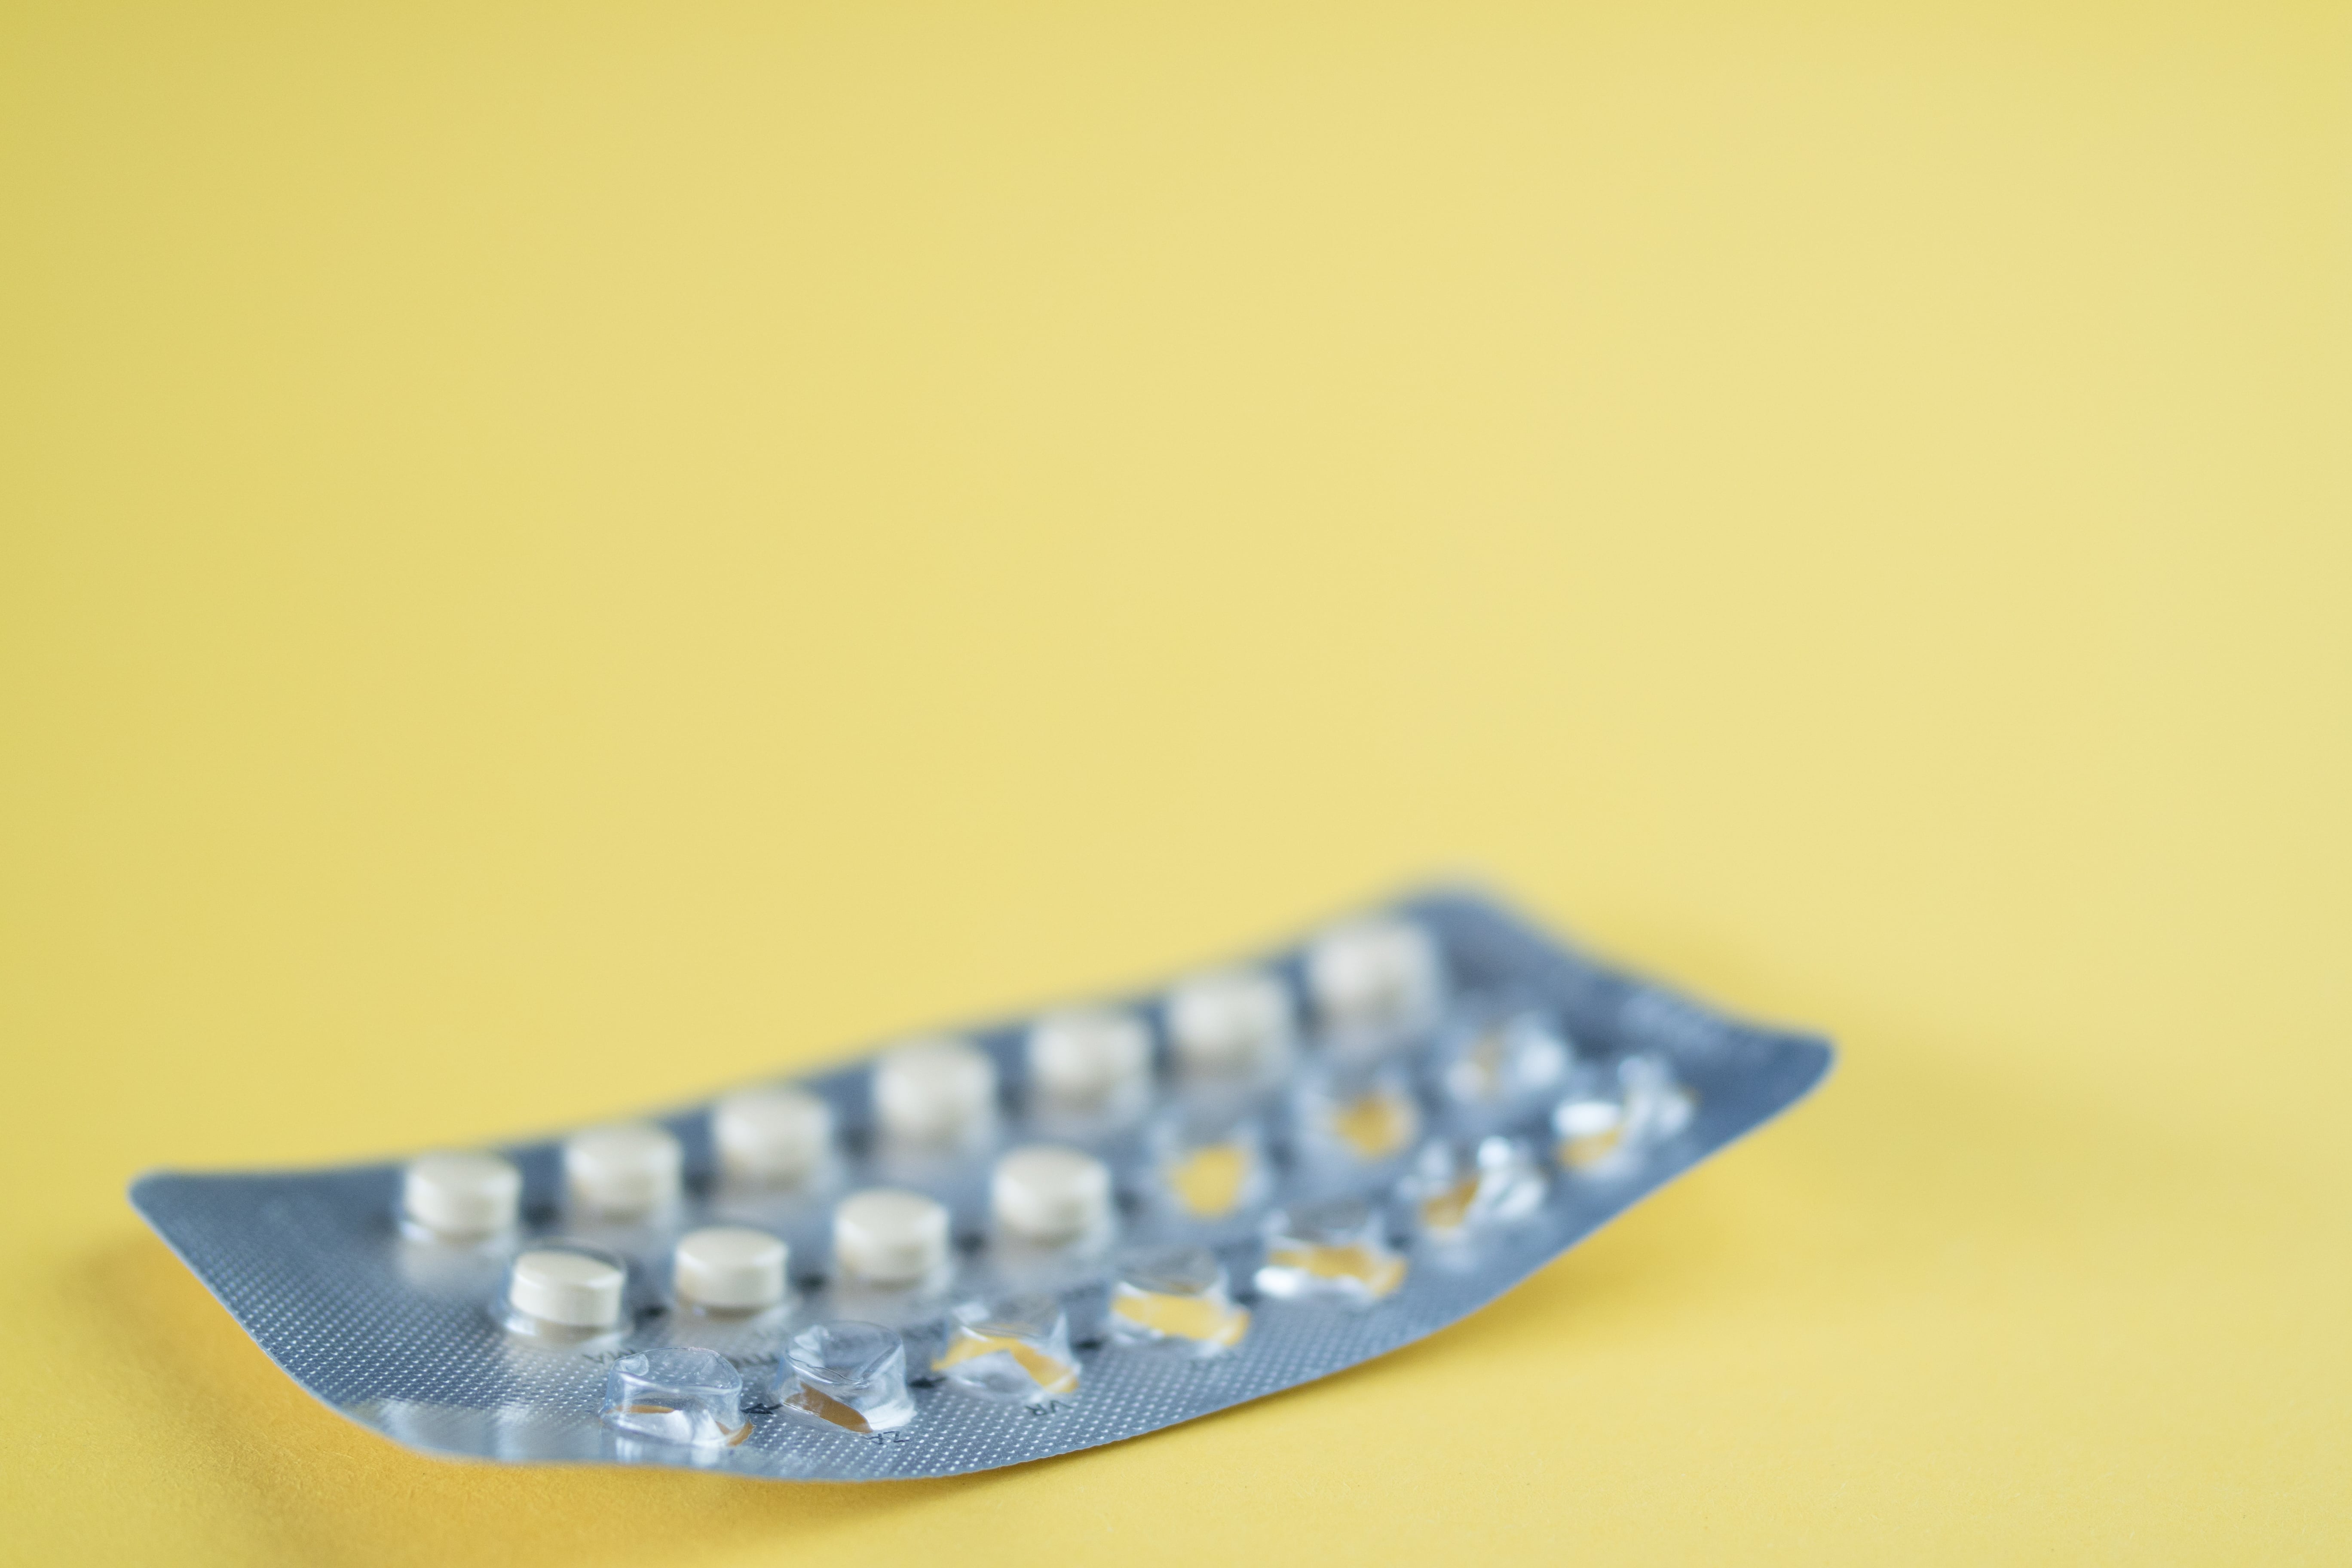 Why I Stopped Taking Birth Control